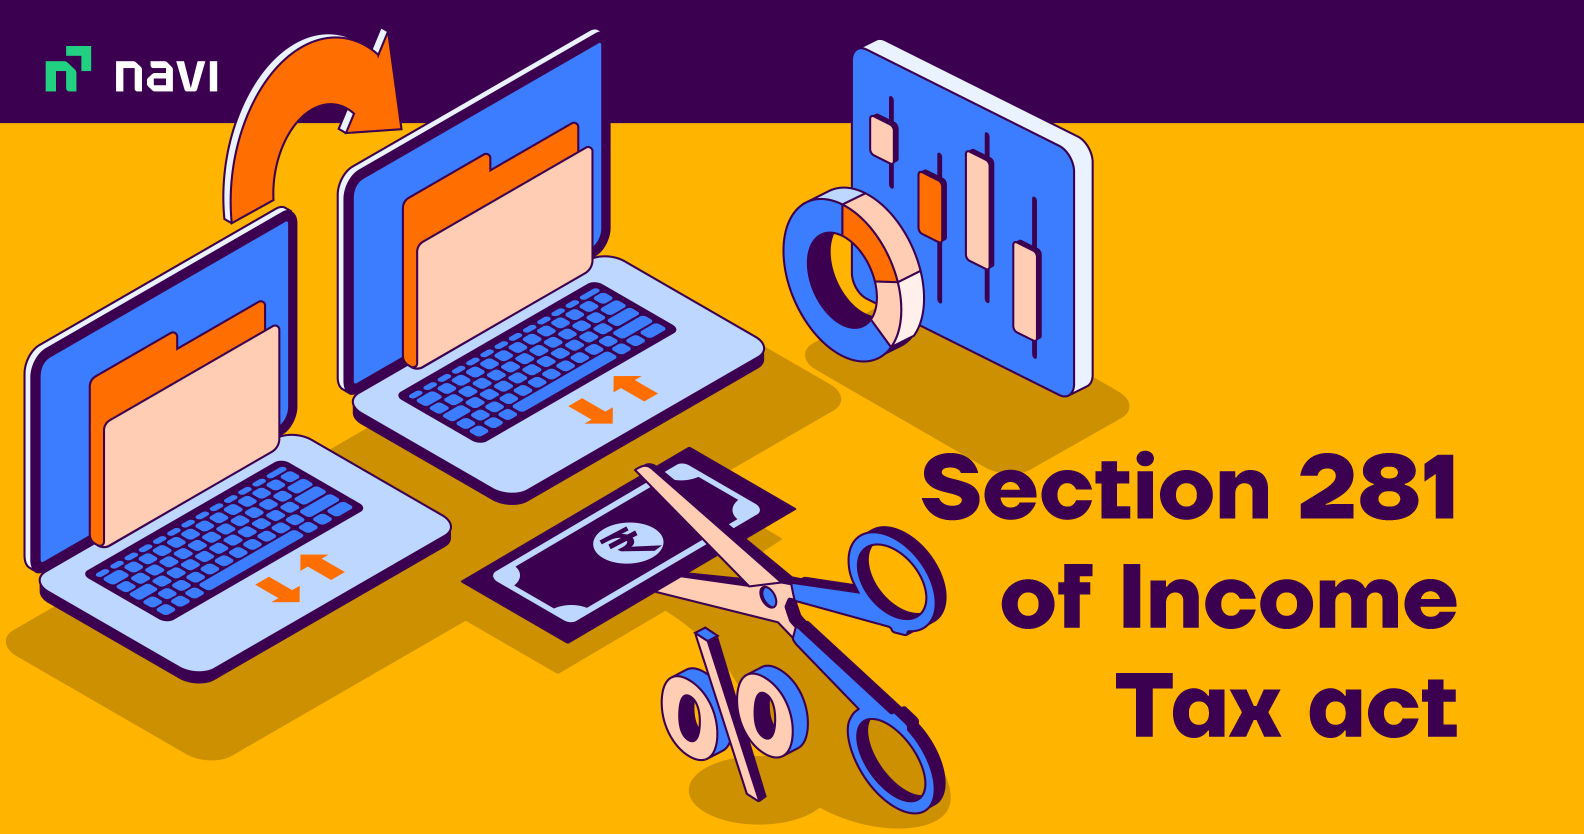 section-281-of-income-tax-act-guidelines-and-details